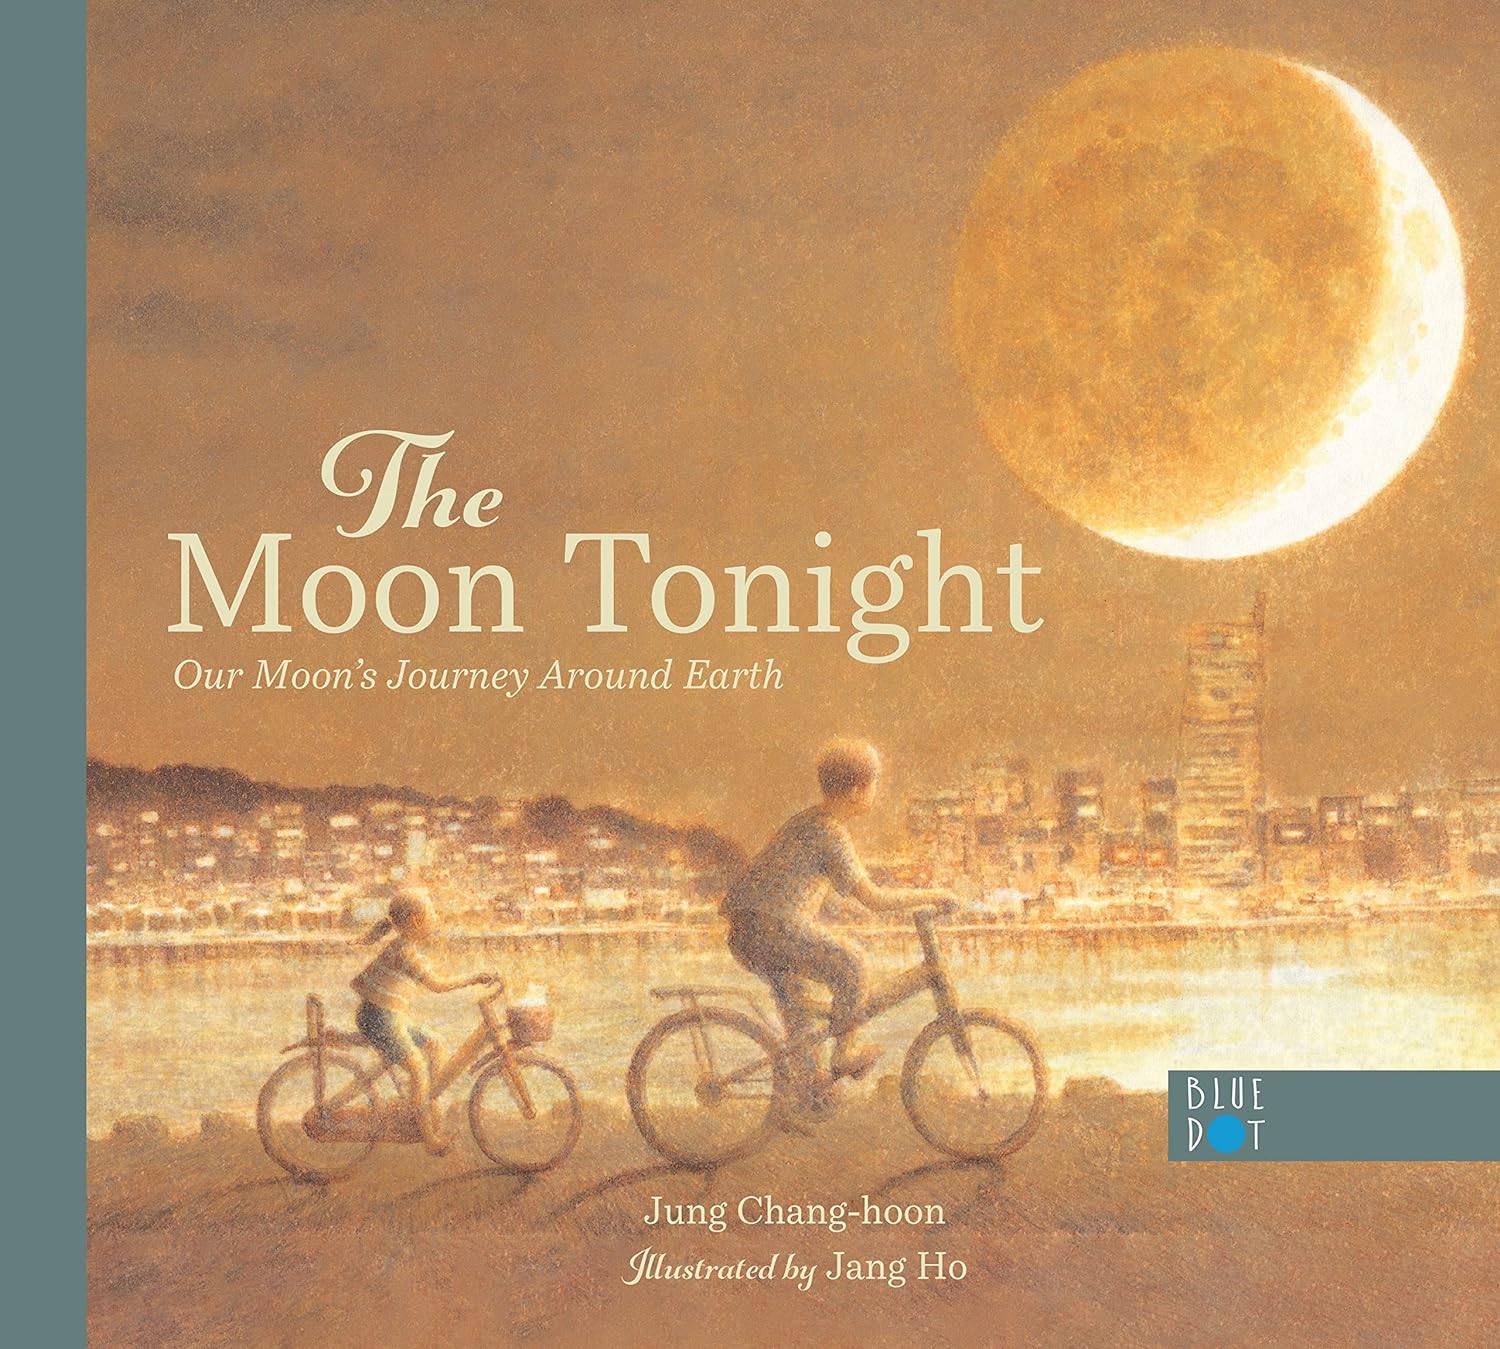 Cover for The Moon Tonight featuring a hazy yellow beige illustration of an older person and a child biking along the banks of a river in a city atmosphere with a large waxing crescent moon above the skyline.